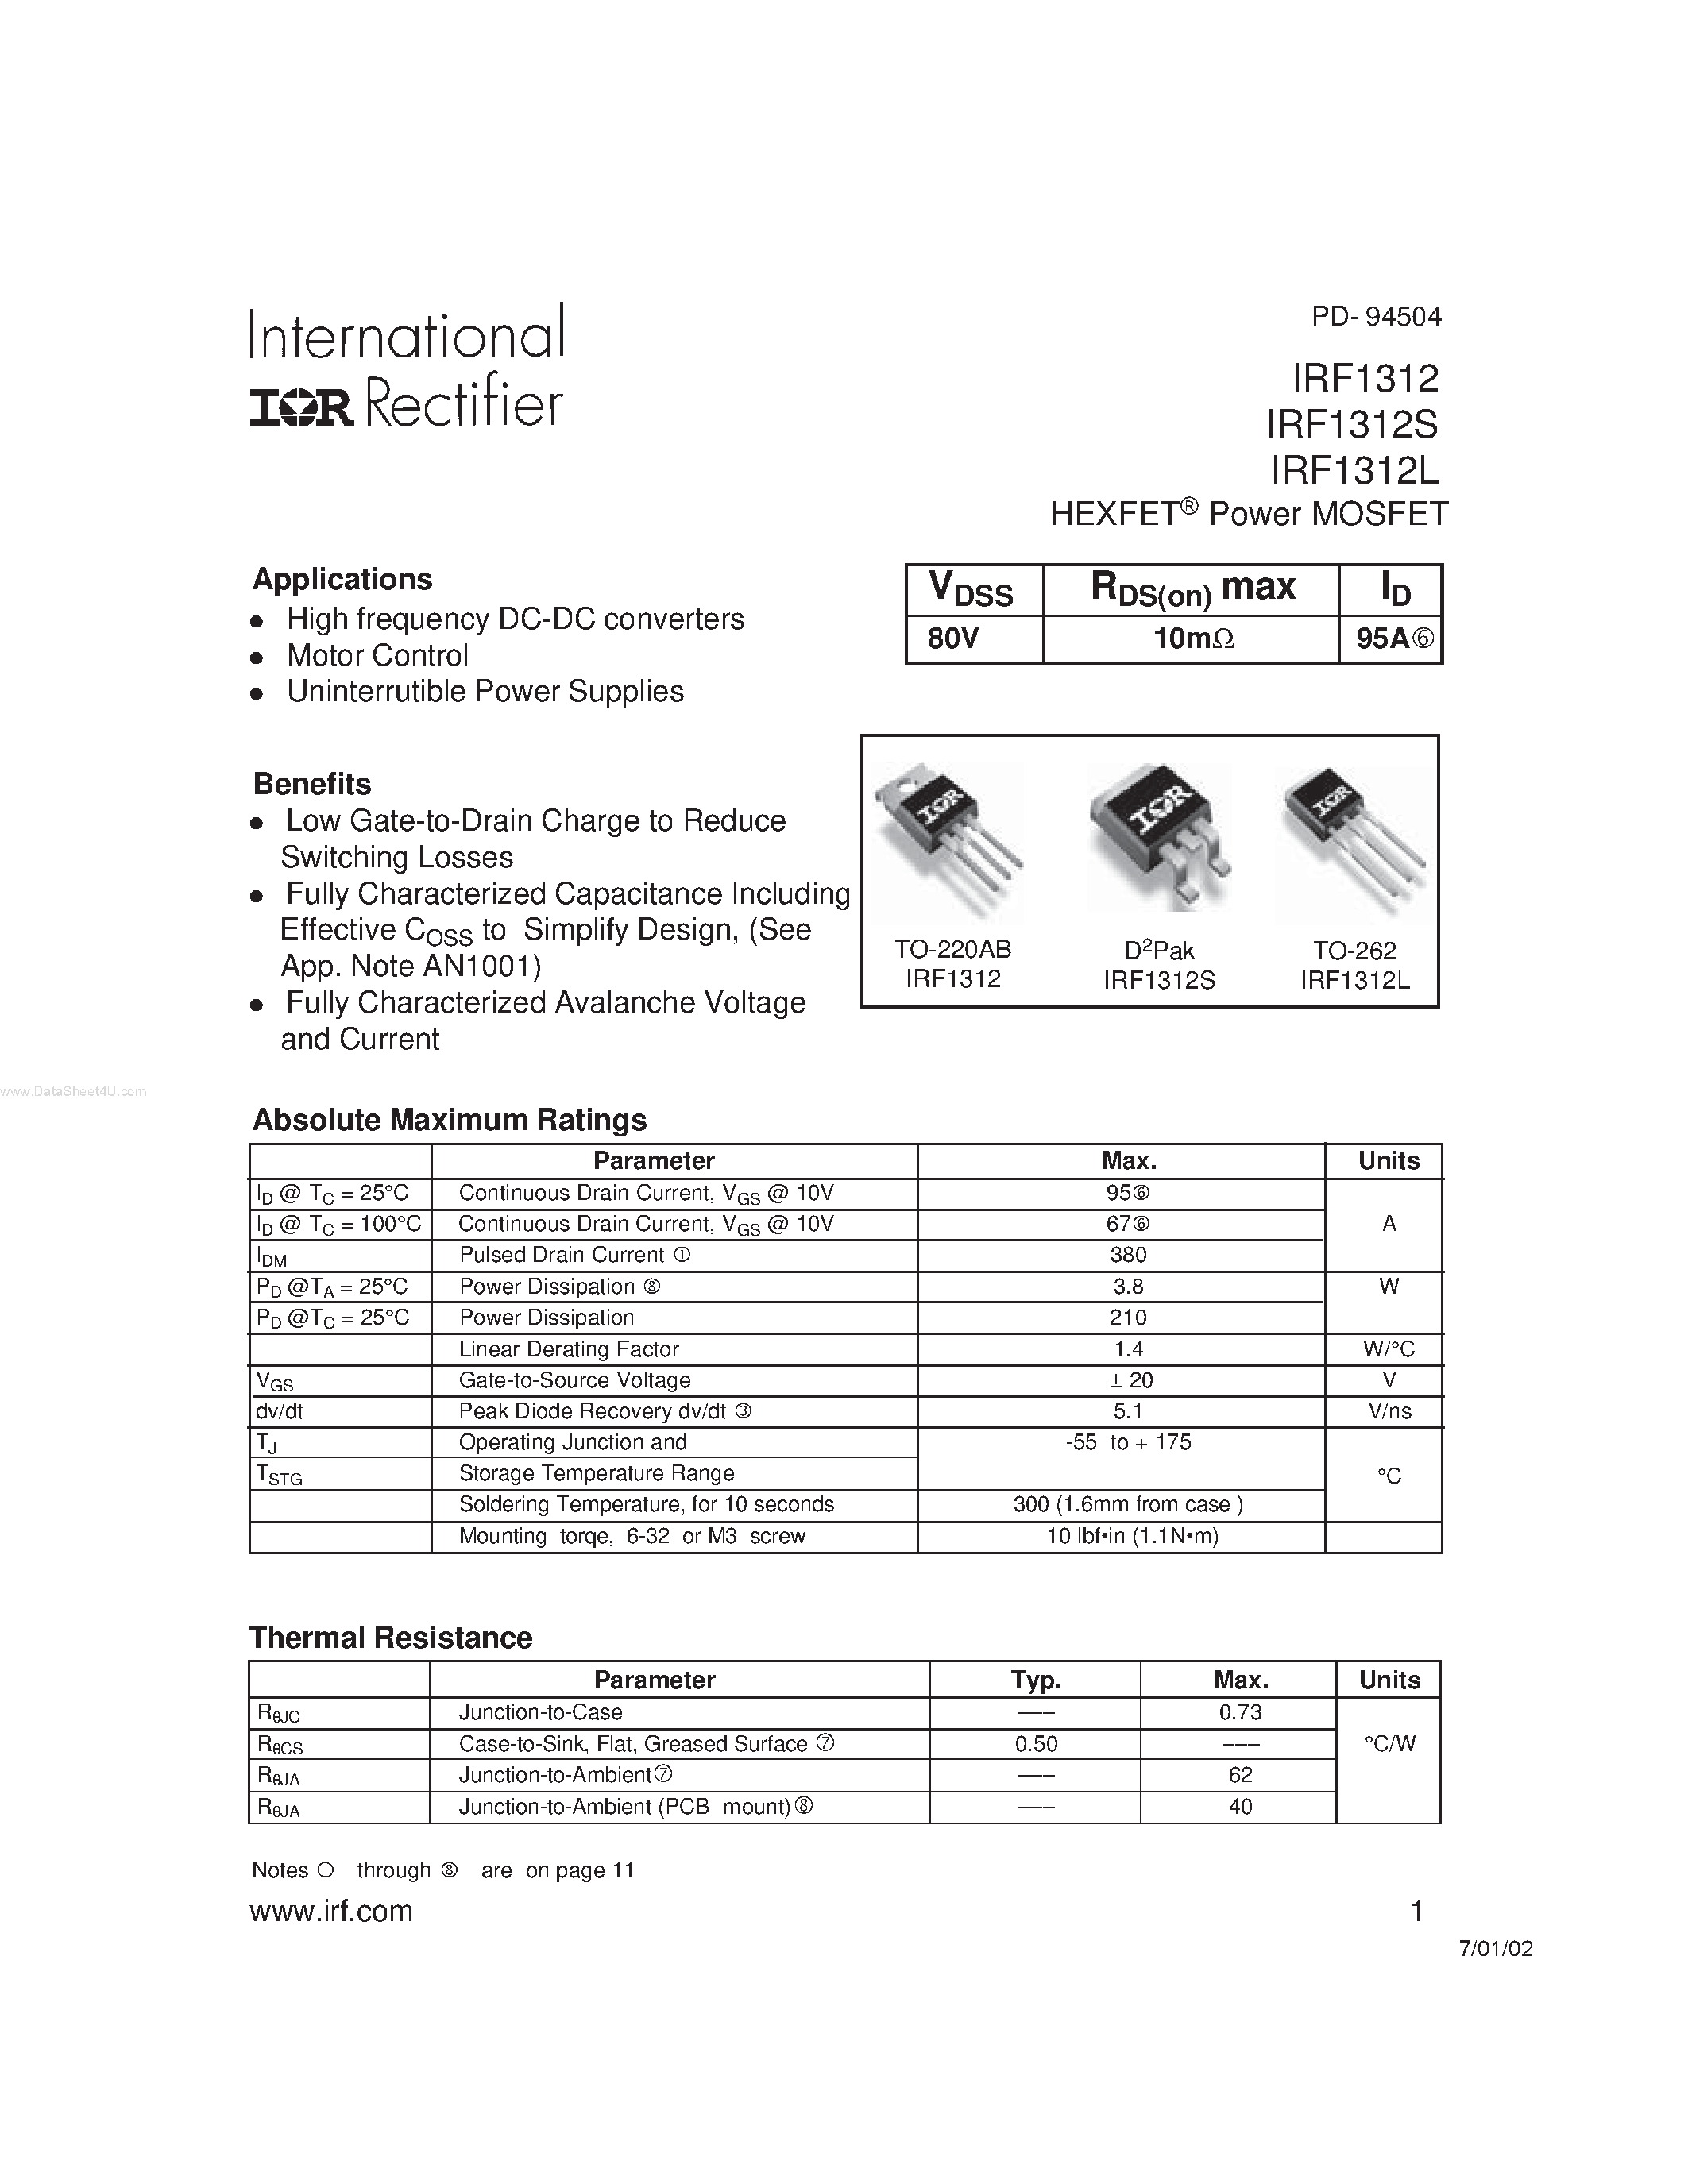 Даташит IRF1312 - (IRF1312x) HEXFET Power MOSFET страница 1